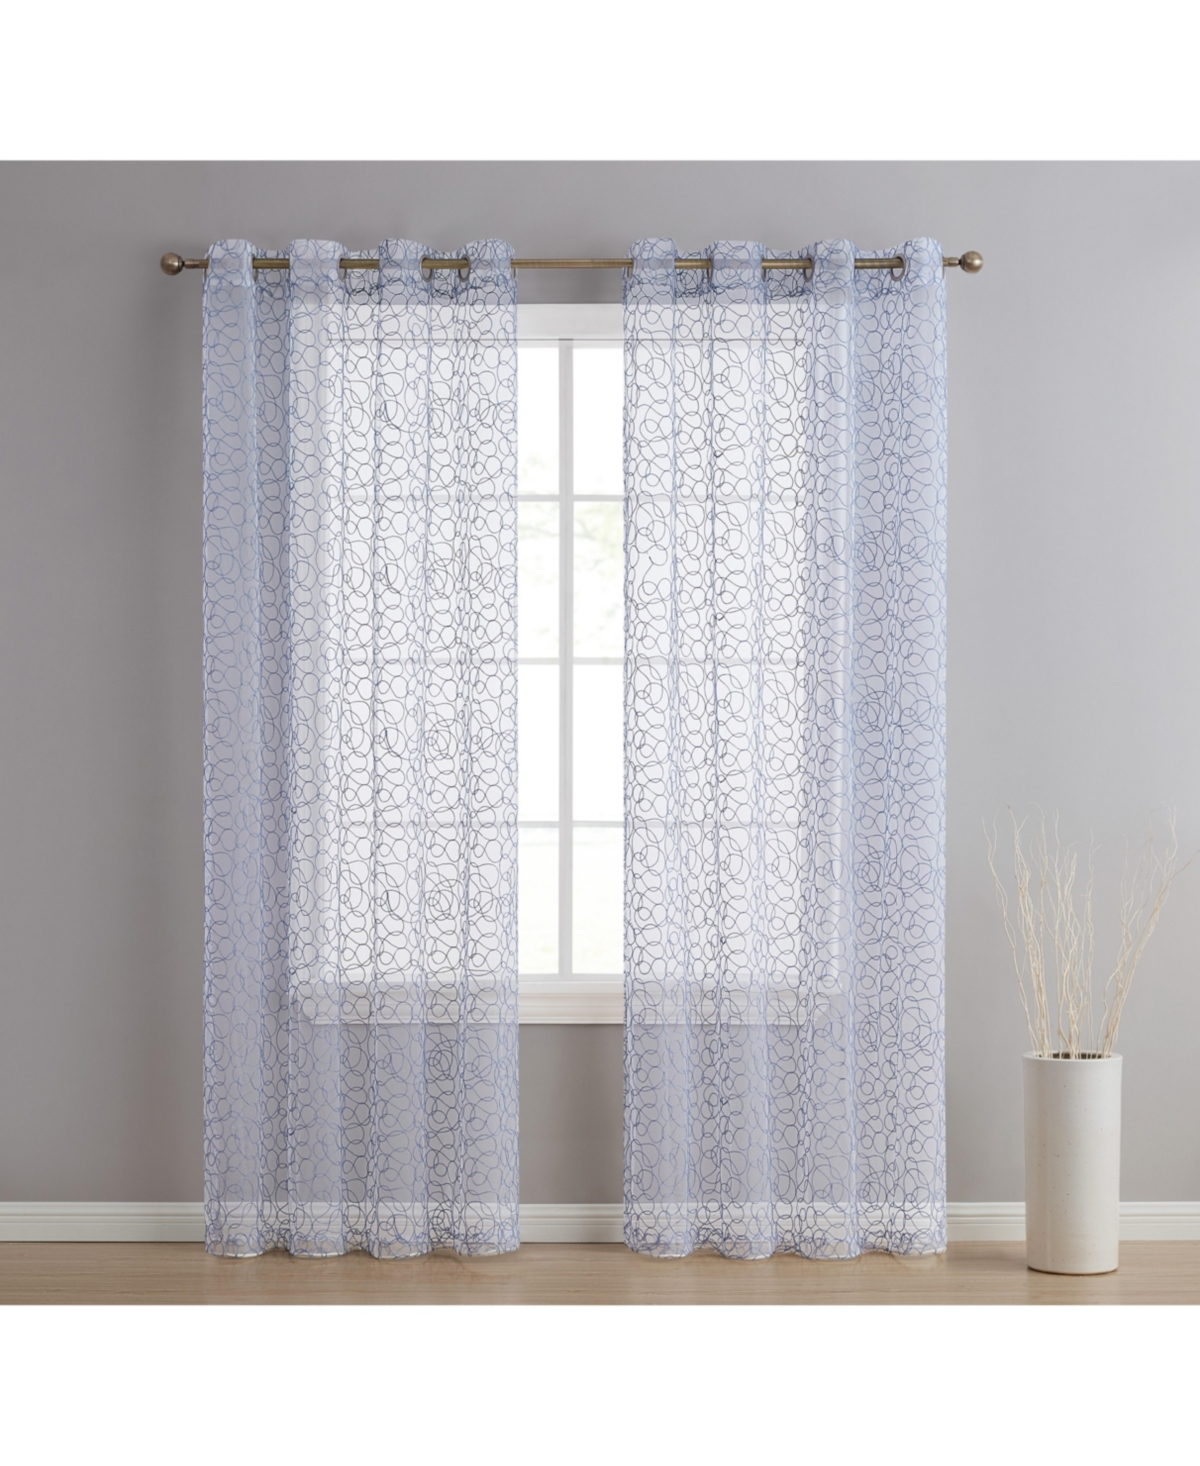 Audrey Embroidered Premium Soft Decorative Sheer Voile Light Filtering Grommet Window Treatment Curtain Drapery Panels for Bedroom & Living Roo